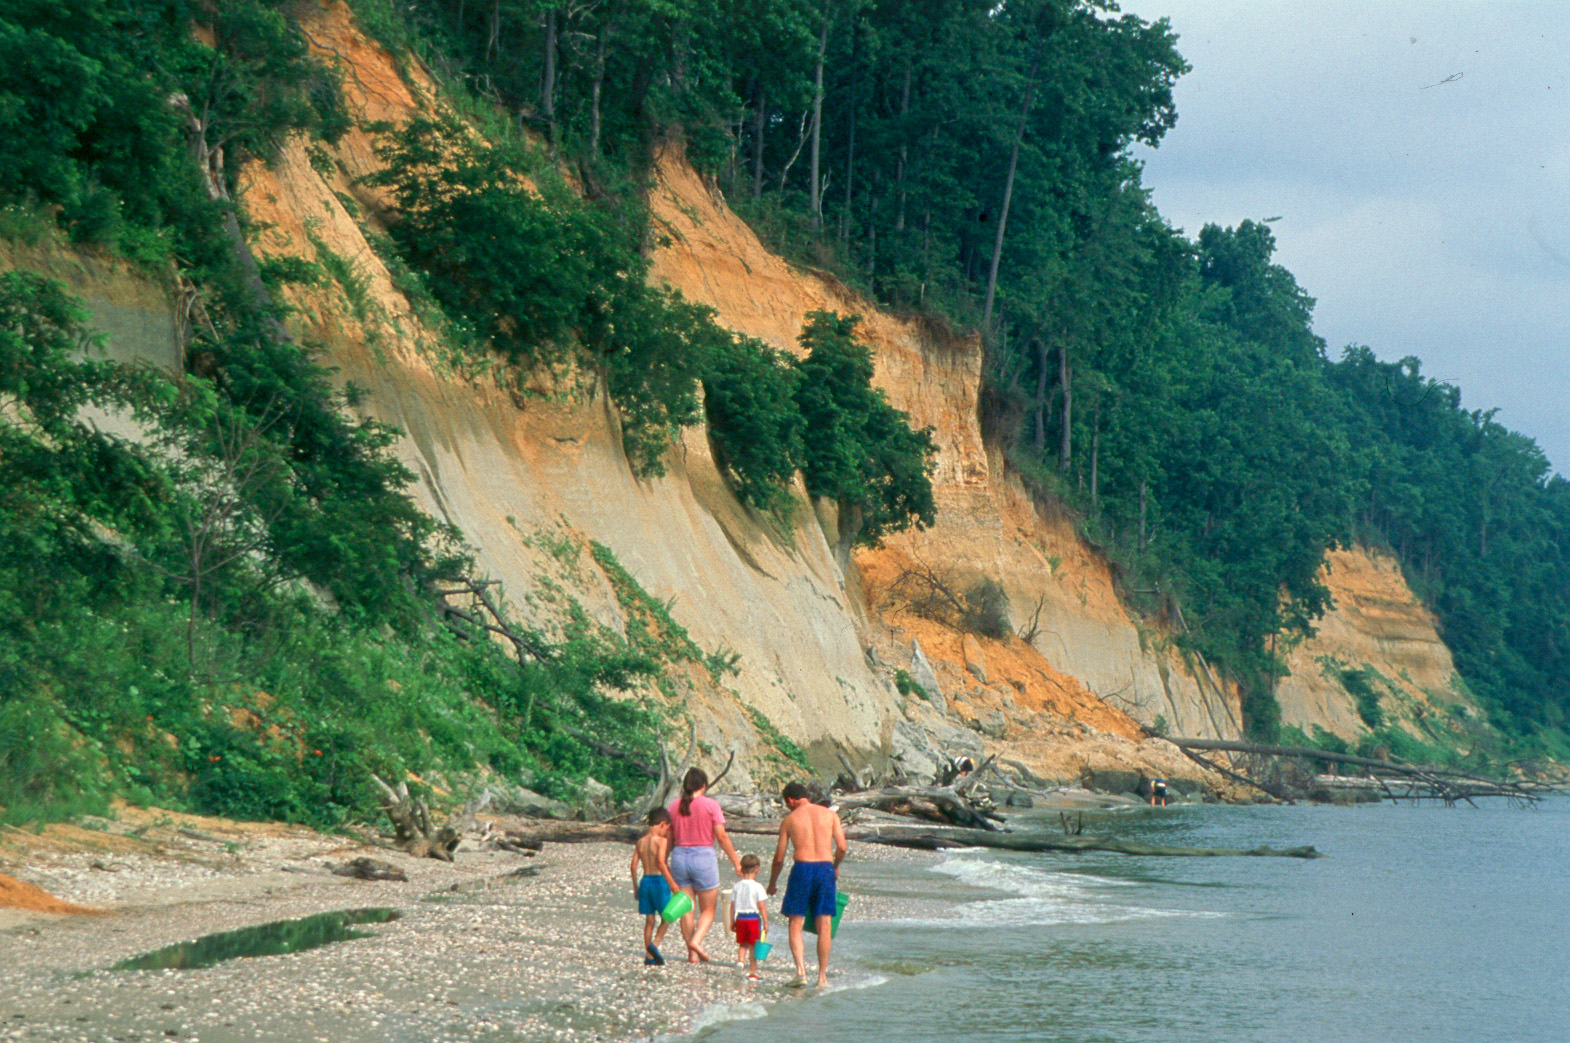 A family walks along the beach searching for fossils at Calvert Cliffs.